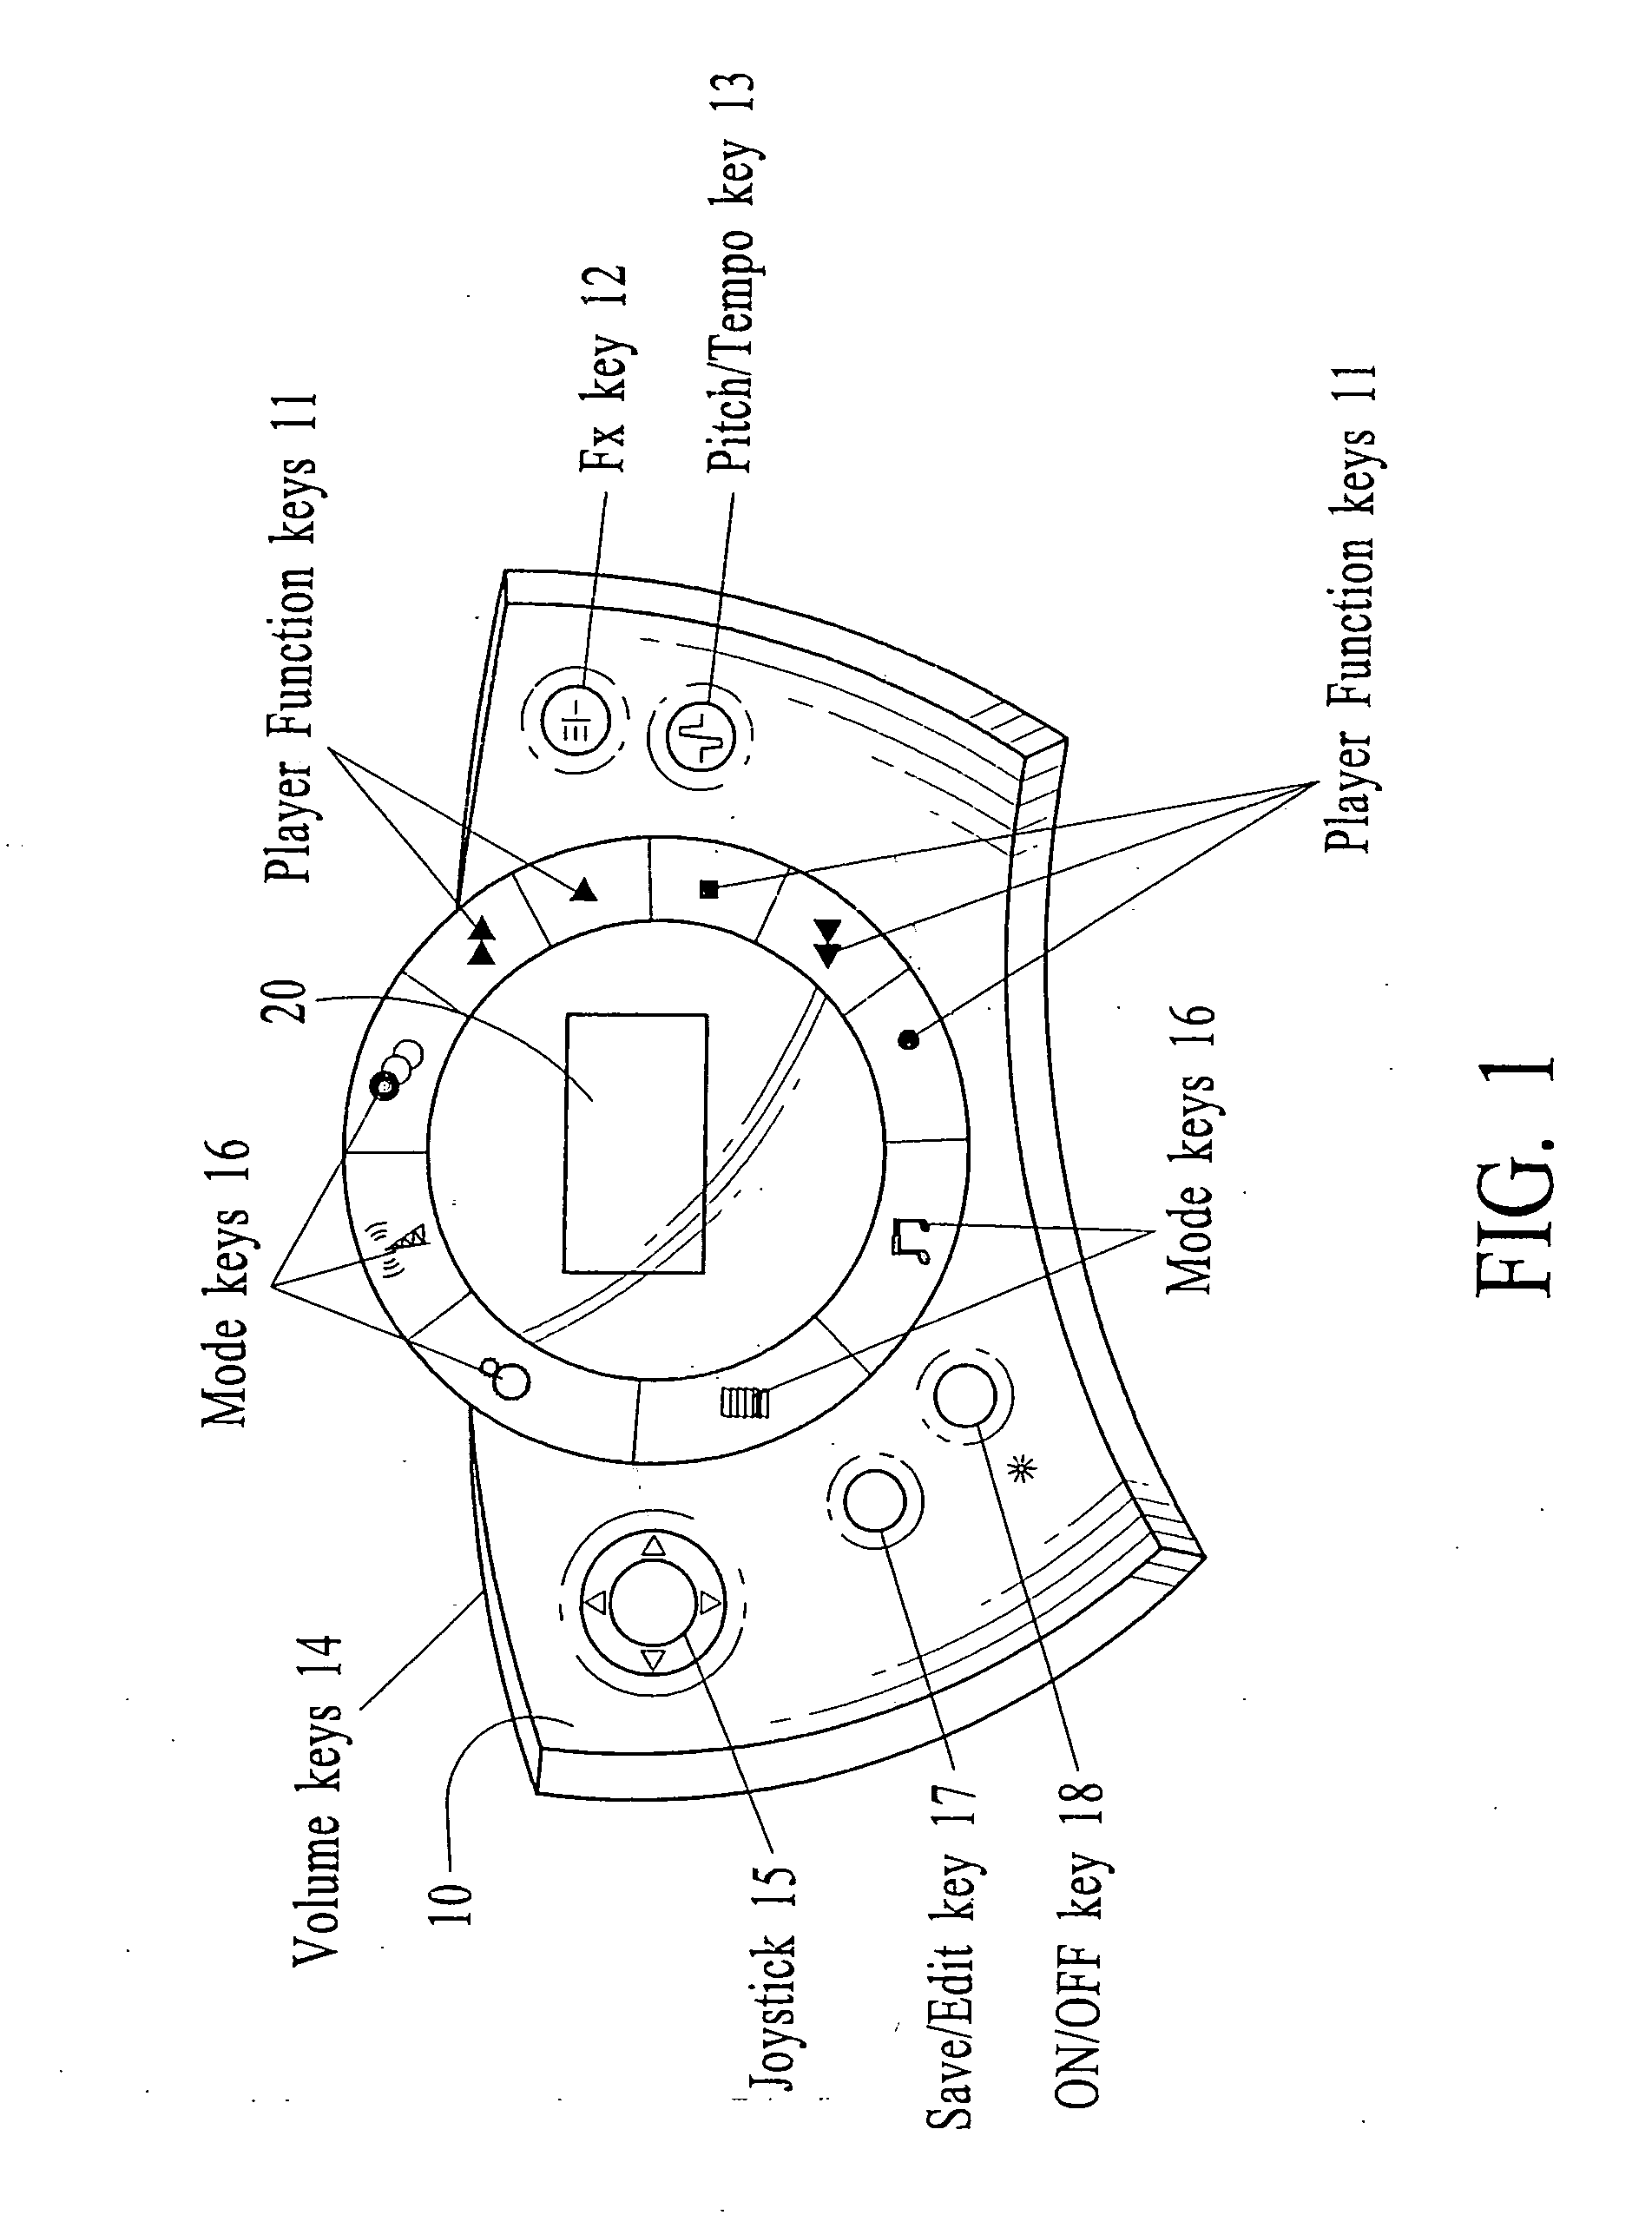 Systems and Methods for Portable Audio Synthesis